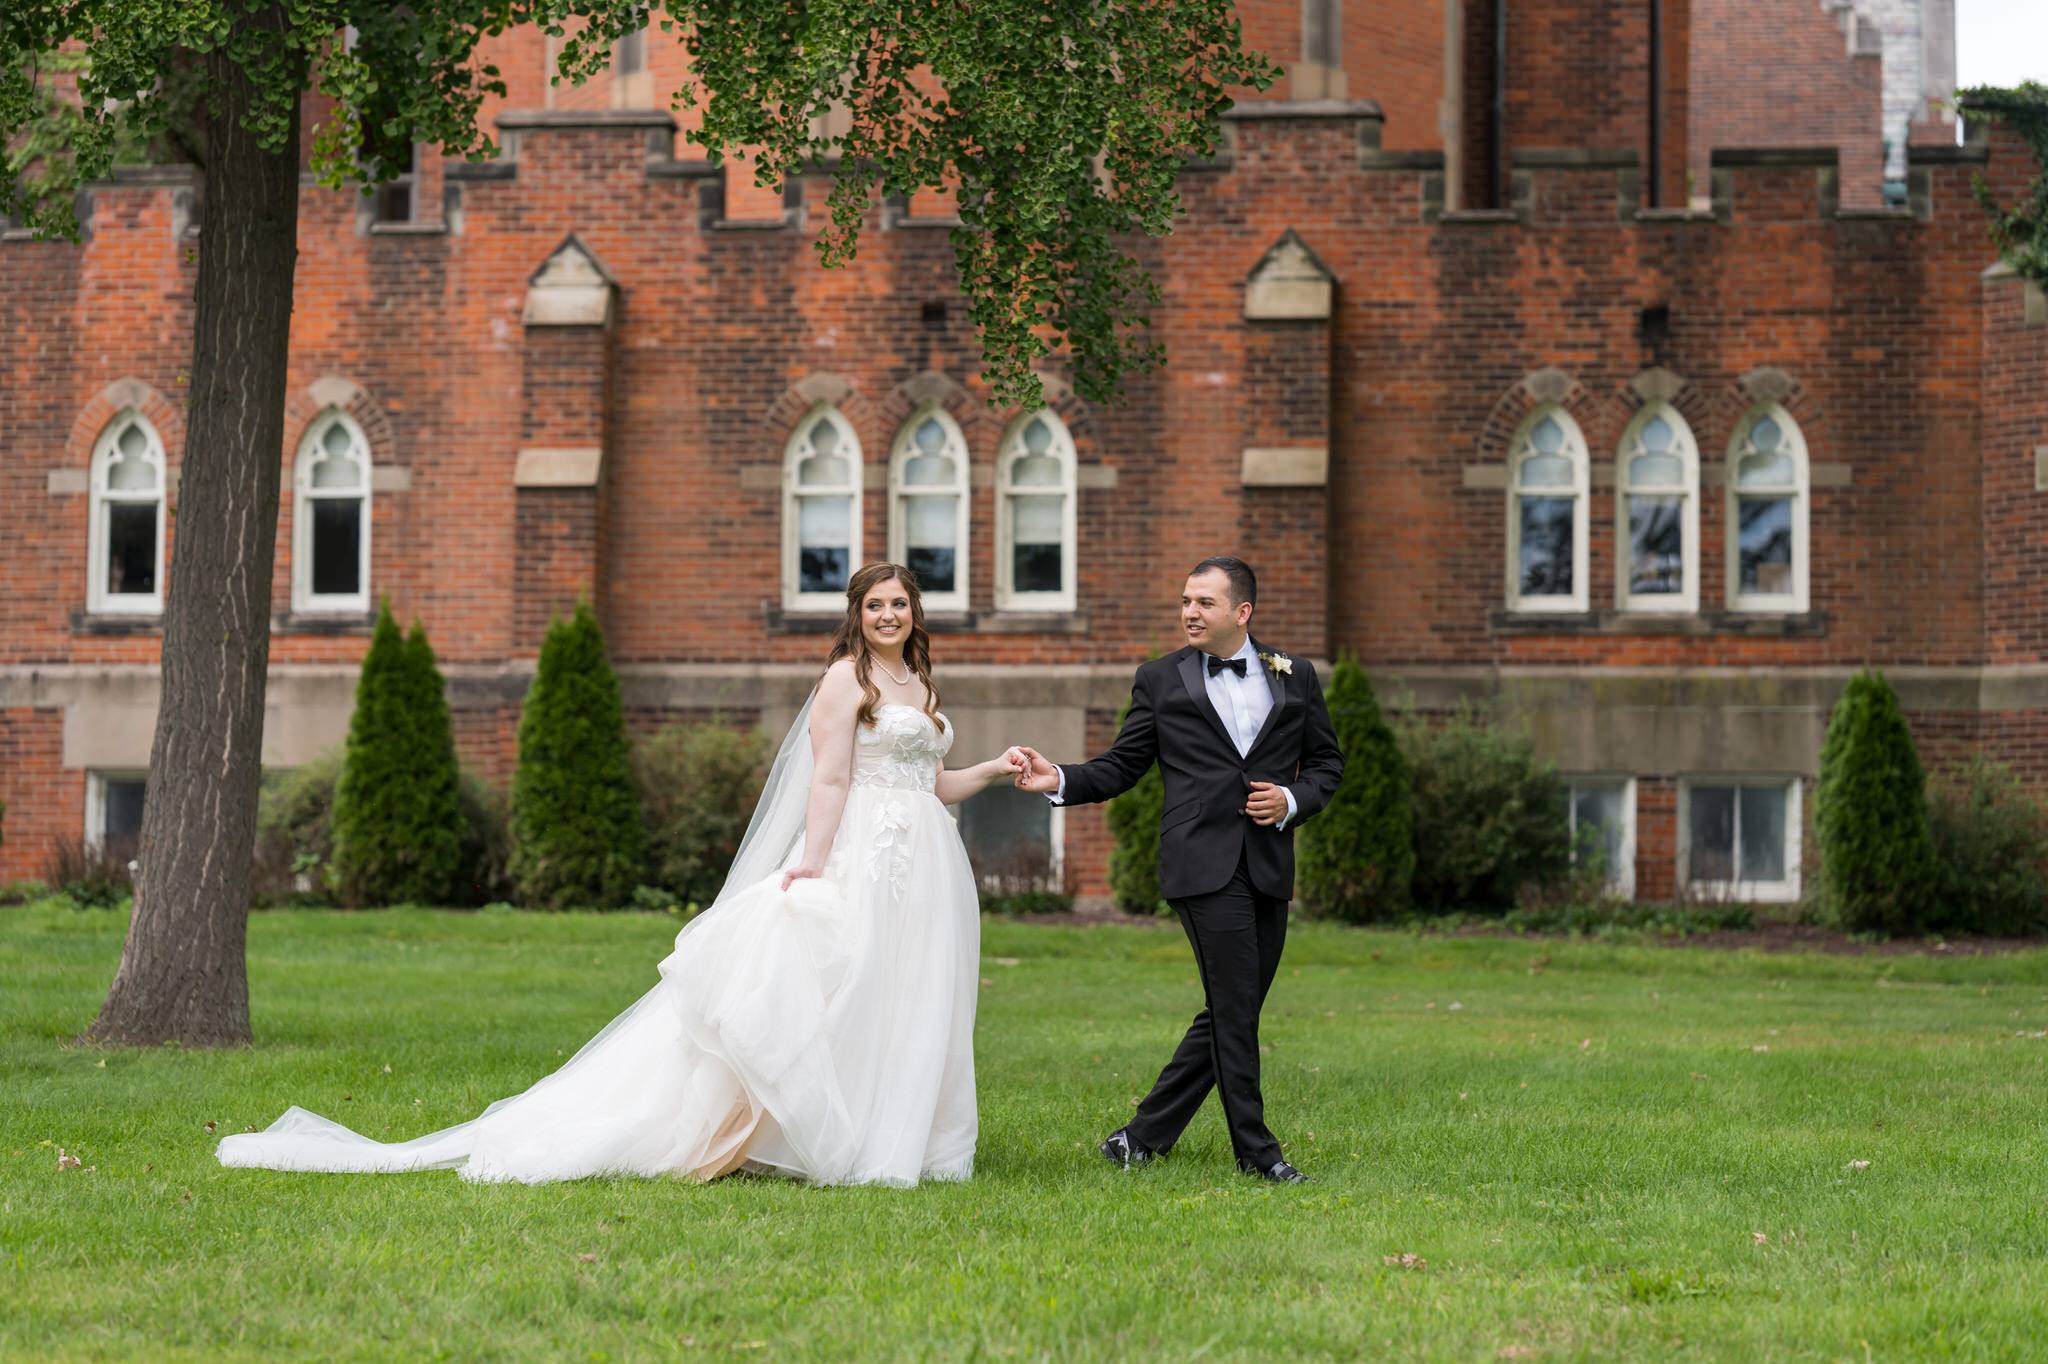 A bride and groom walk the grounds outside at their Grosse Pointe Academy wedding.  